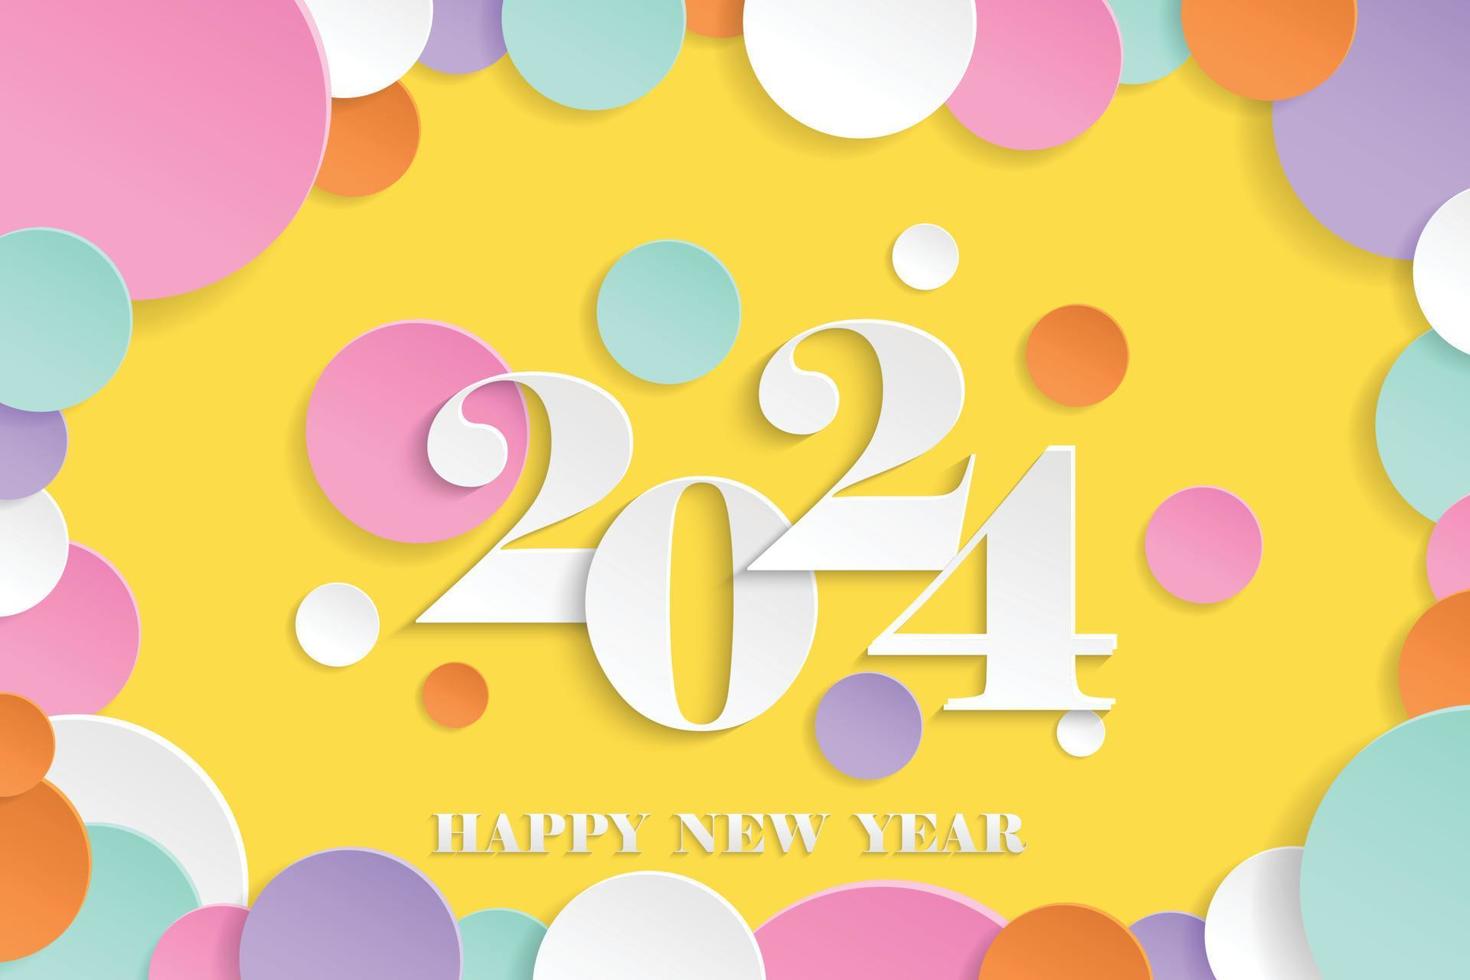 2024 Happy New Year elegant design vector illustration of paper cut White color 2024 logo numbers on Yellow background perfect typography for 2024 save the date luxury designs and new year celebration